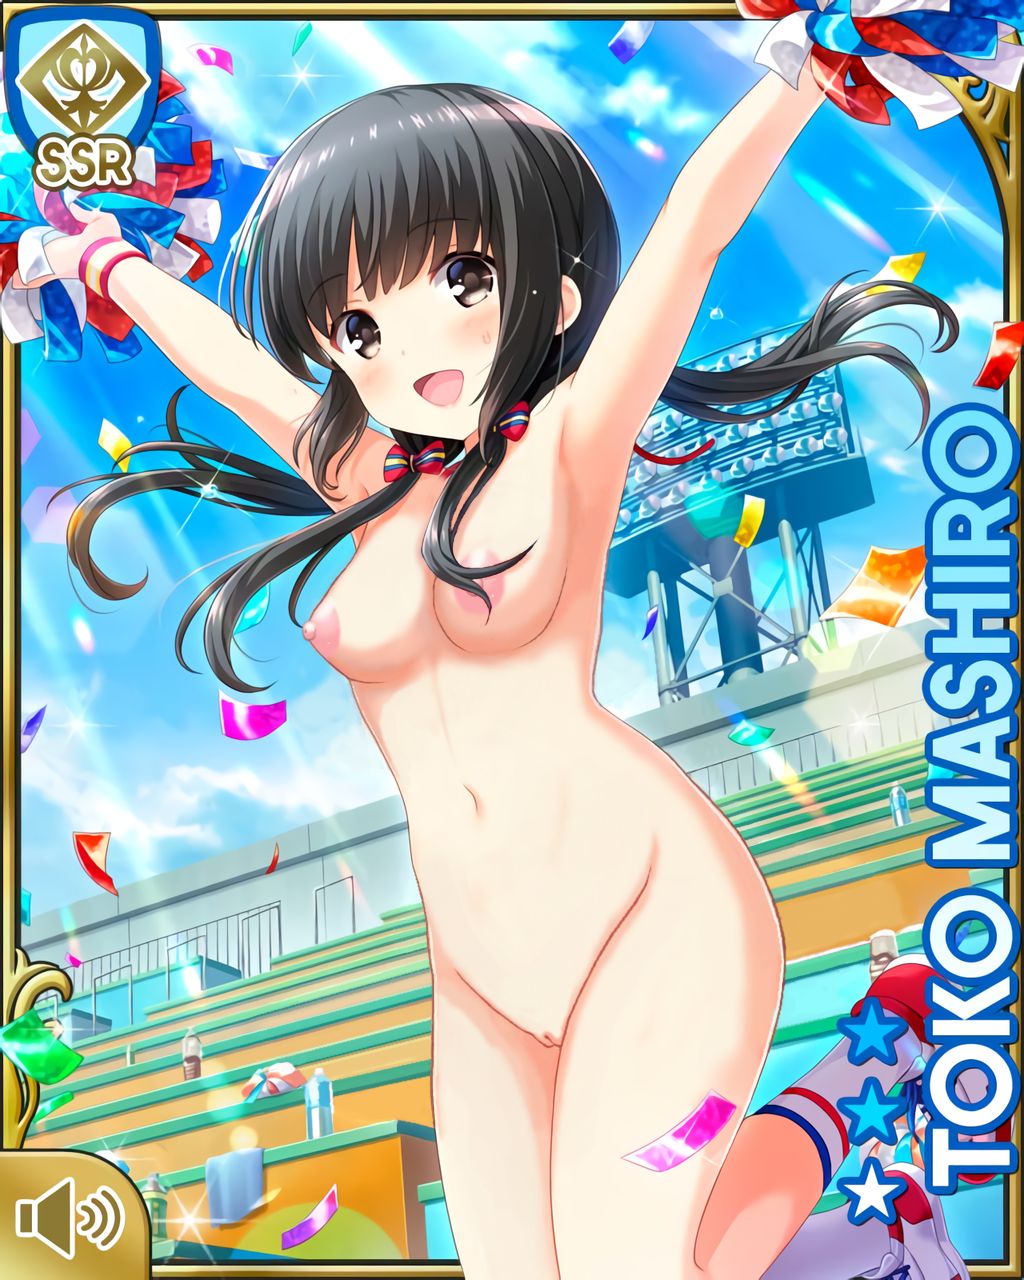 [Stripped Kora] a large amount of stripped Kora image, such as anime official picture part 362 22